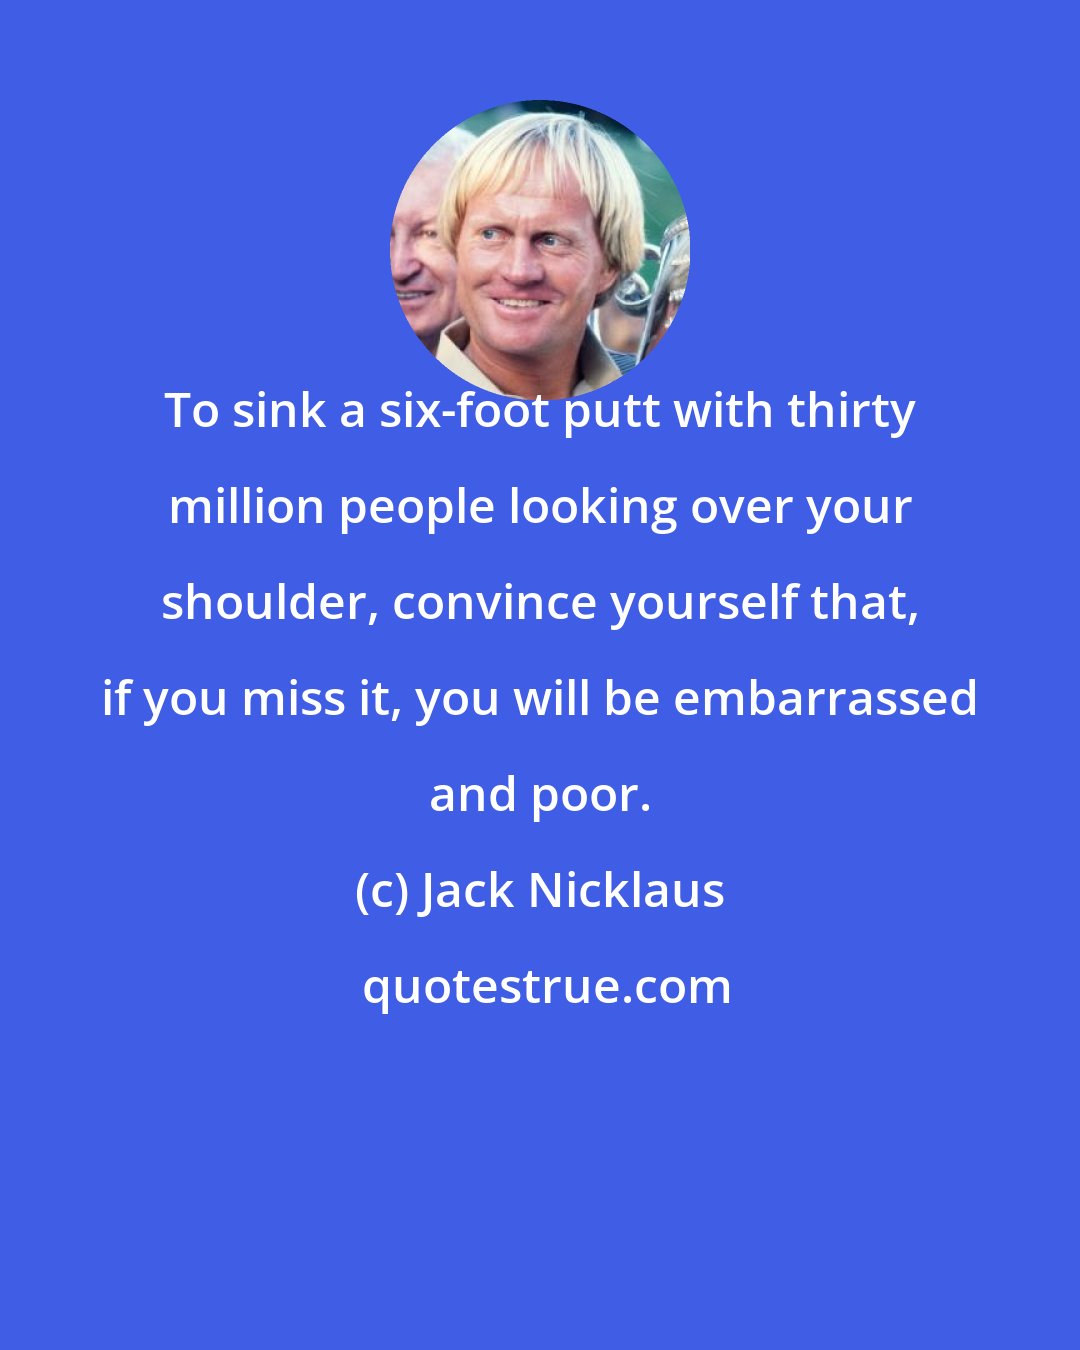 Jack Nicklaus: To sink a six-foot putt with thirty million people looking over your shoulder, convince yourself that, if you miss it, you will be embarrassed and poor.